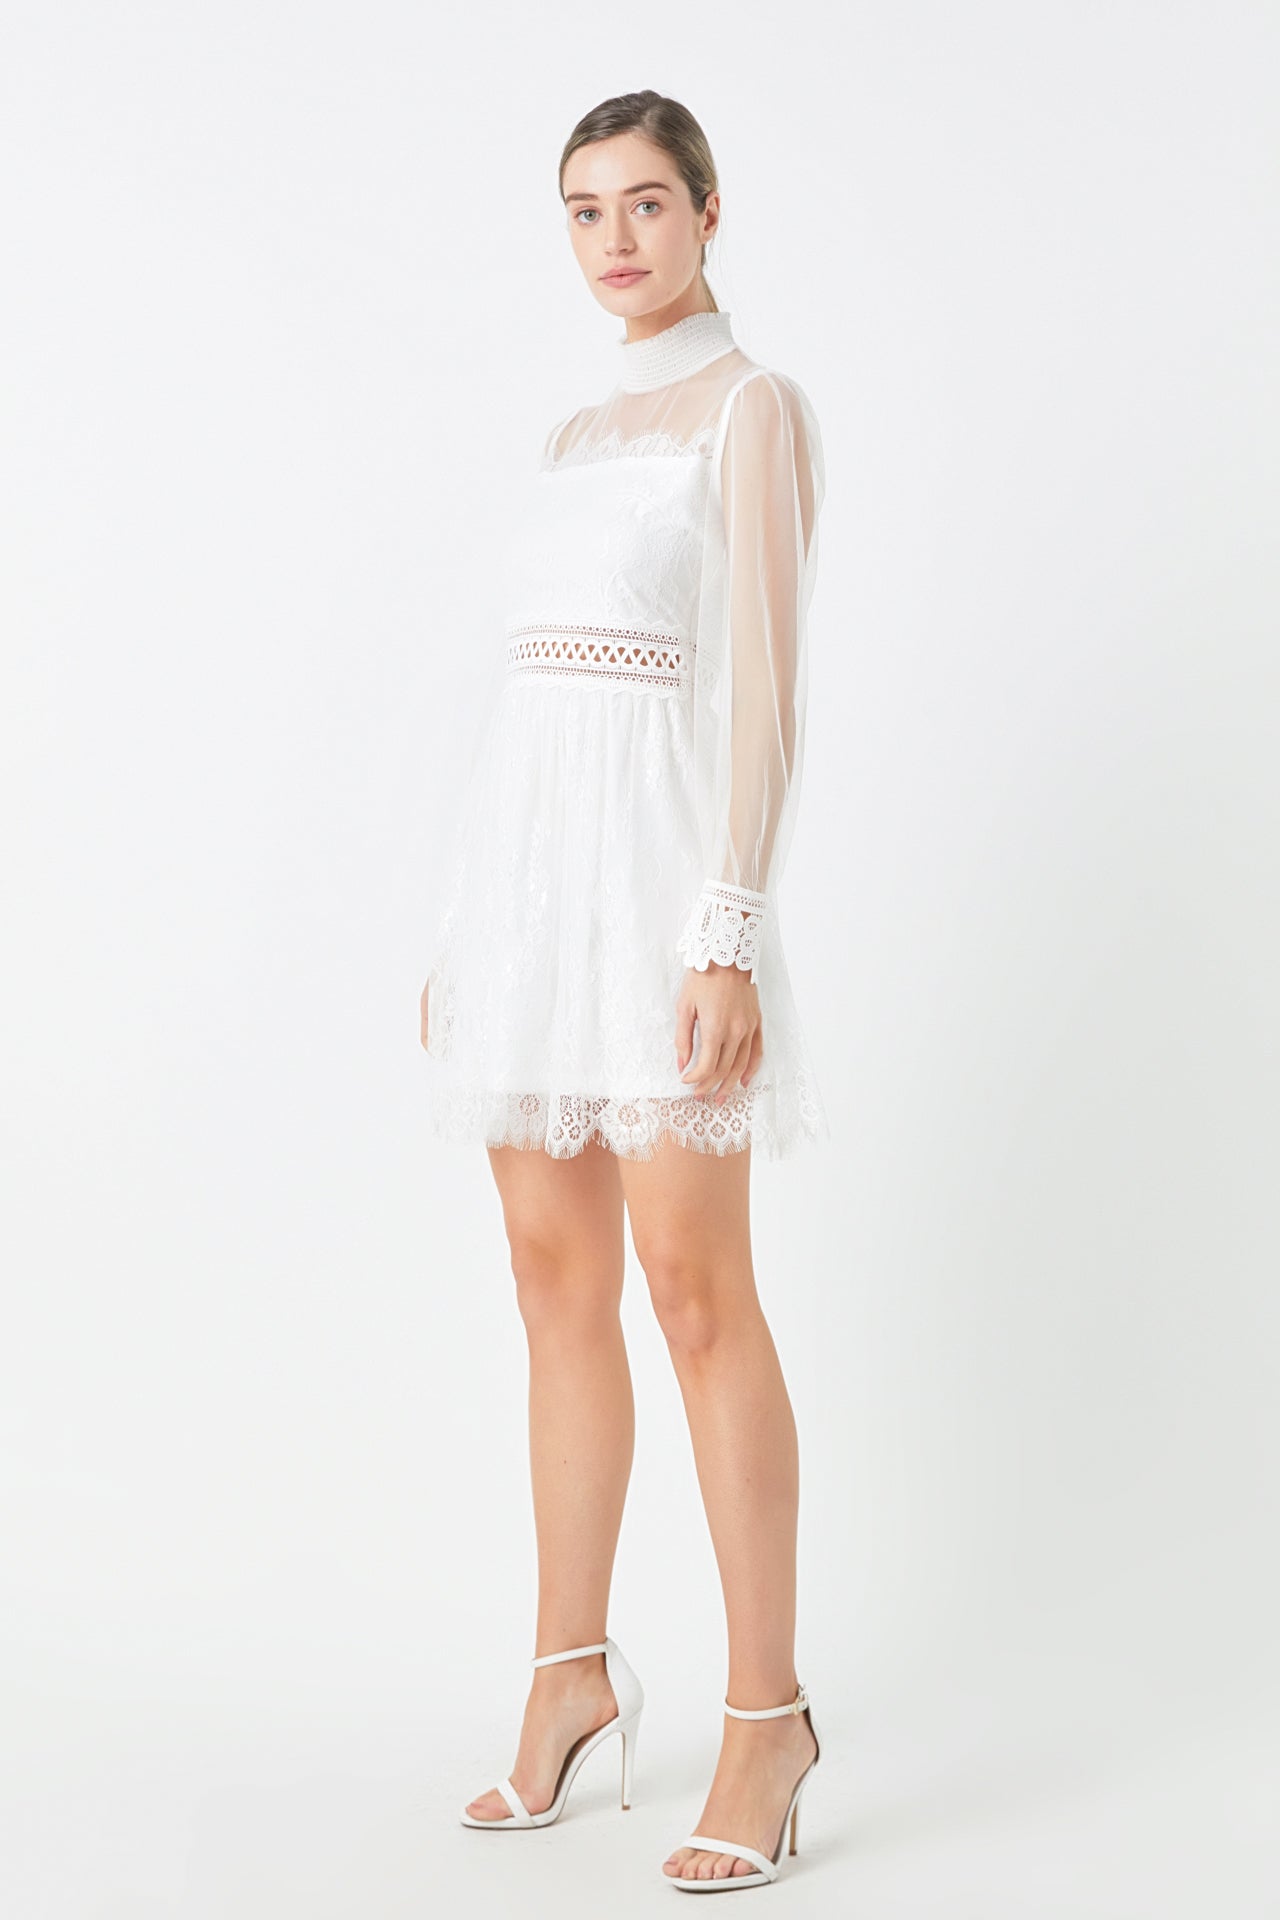 ENDLESS ROSE - Long Sleeve Lace Mini Dress - DRESSES available at Objectrare